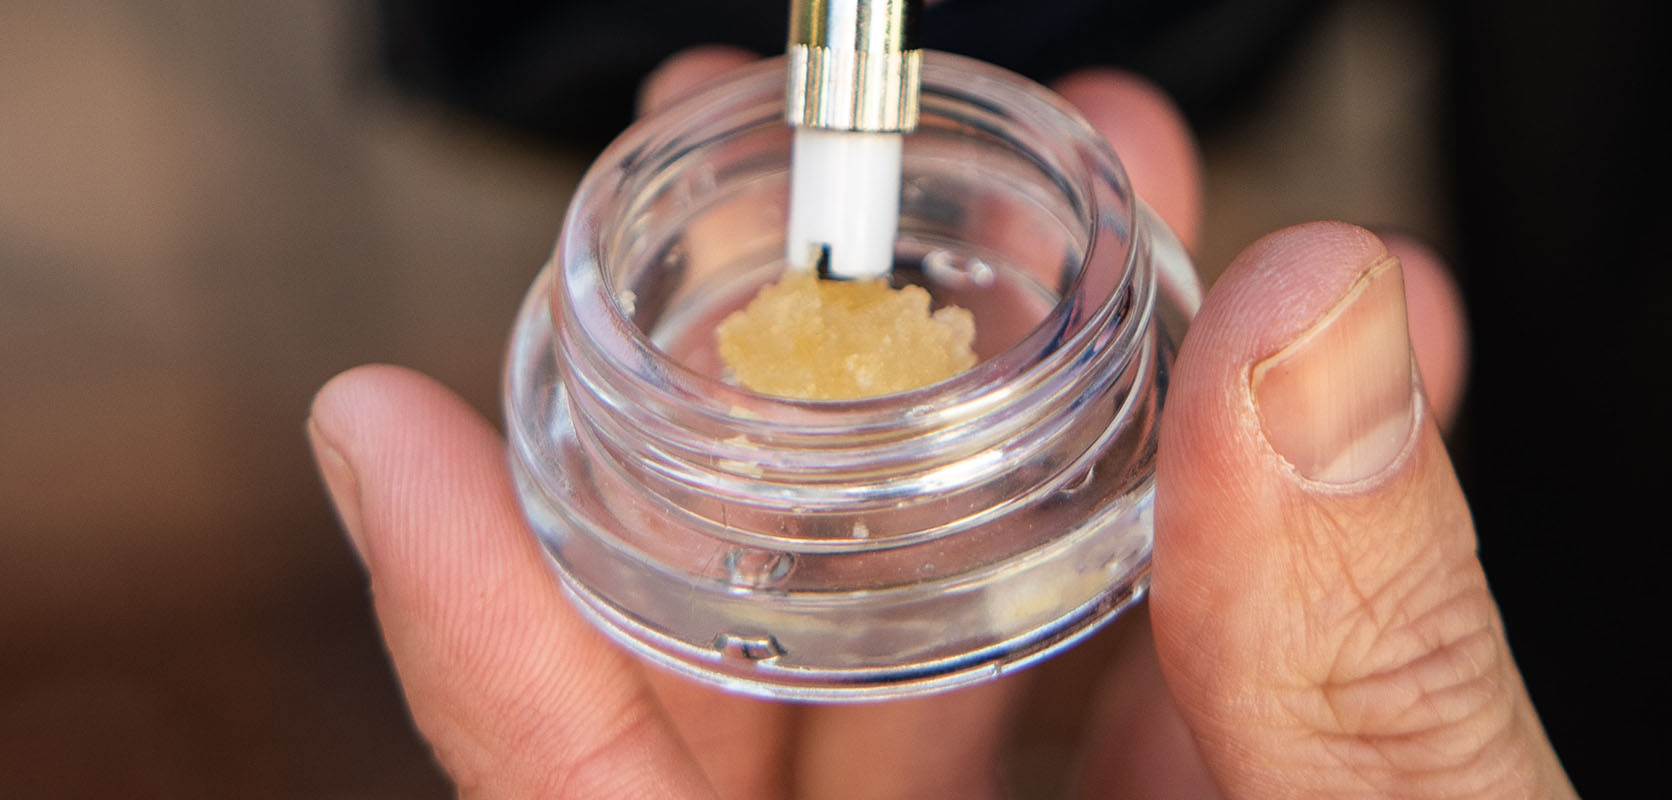 Weed Concentrates and dab tools. Buy cannabis concentrates online. Buy weed online in Canada at online dispensary low price bud.